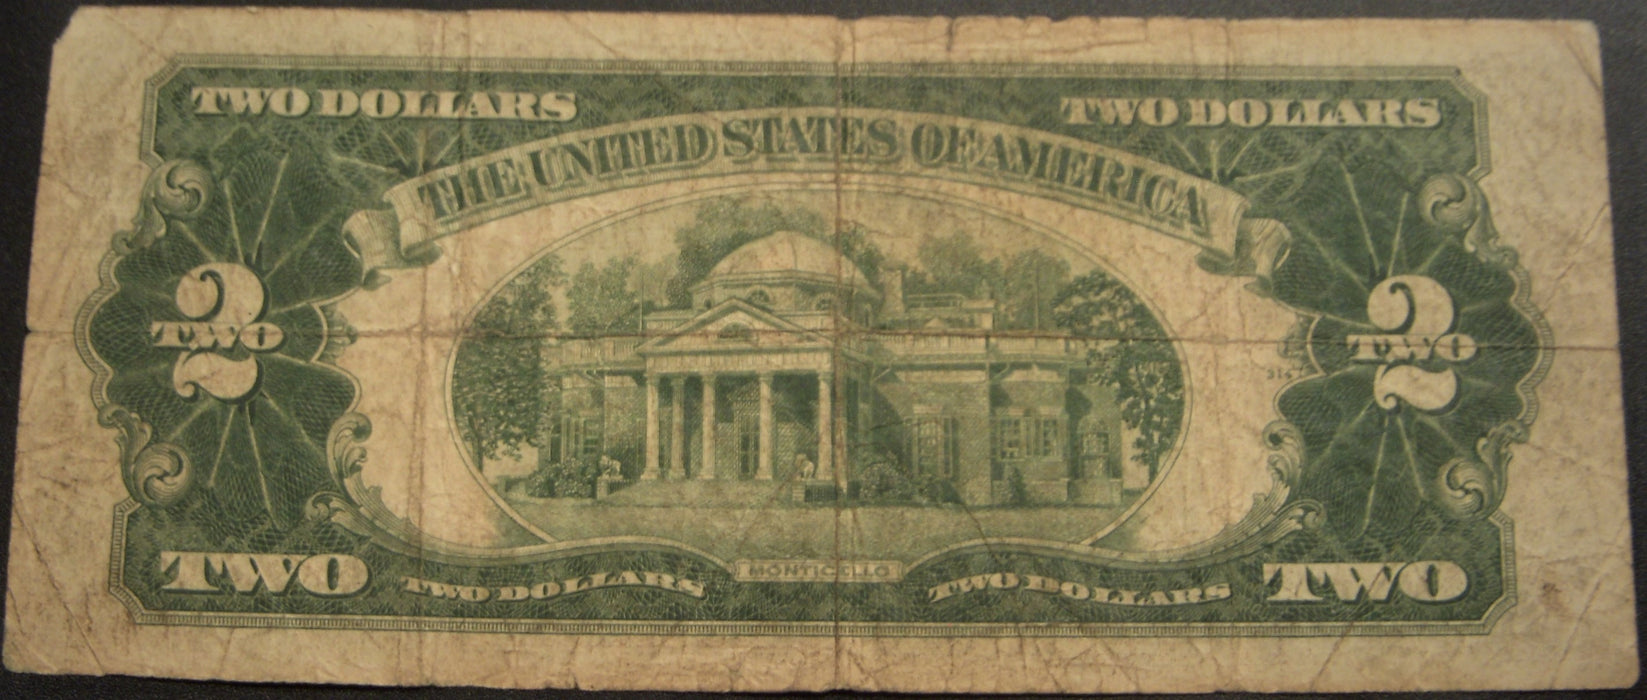 1928D $2 United States Note - FR# 1505